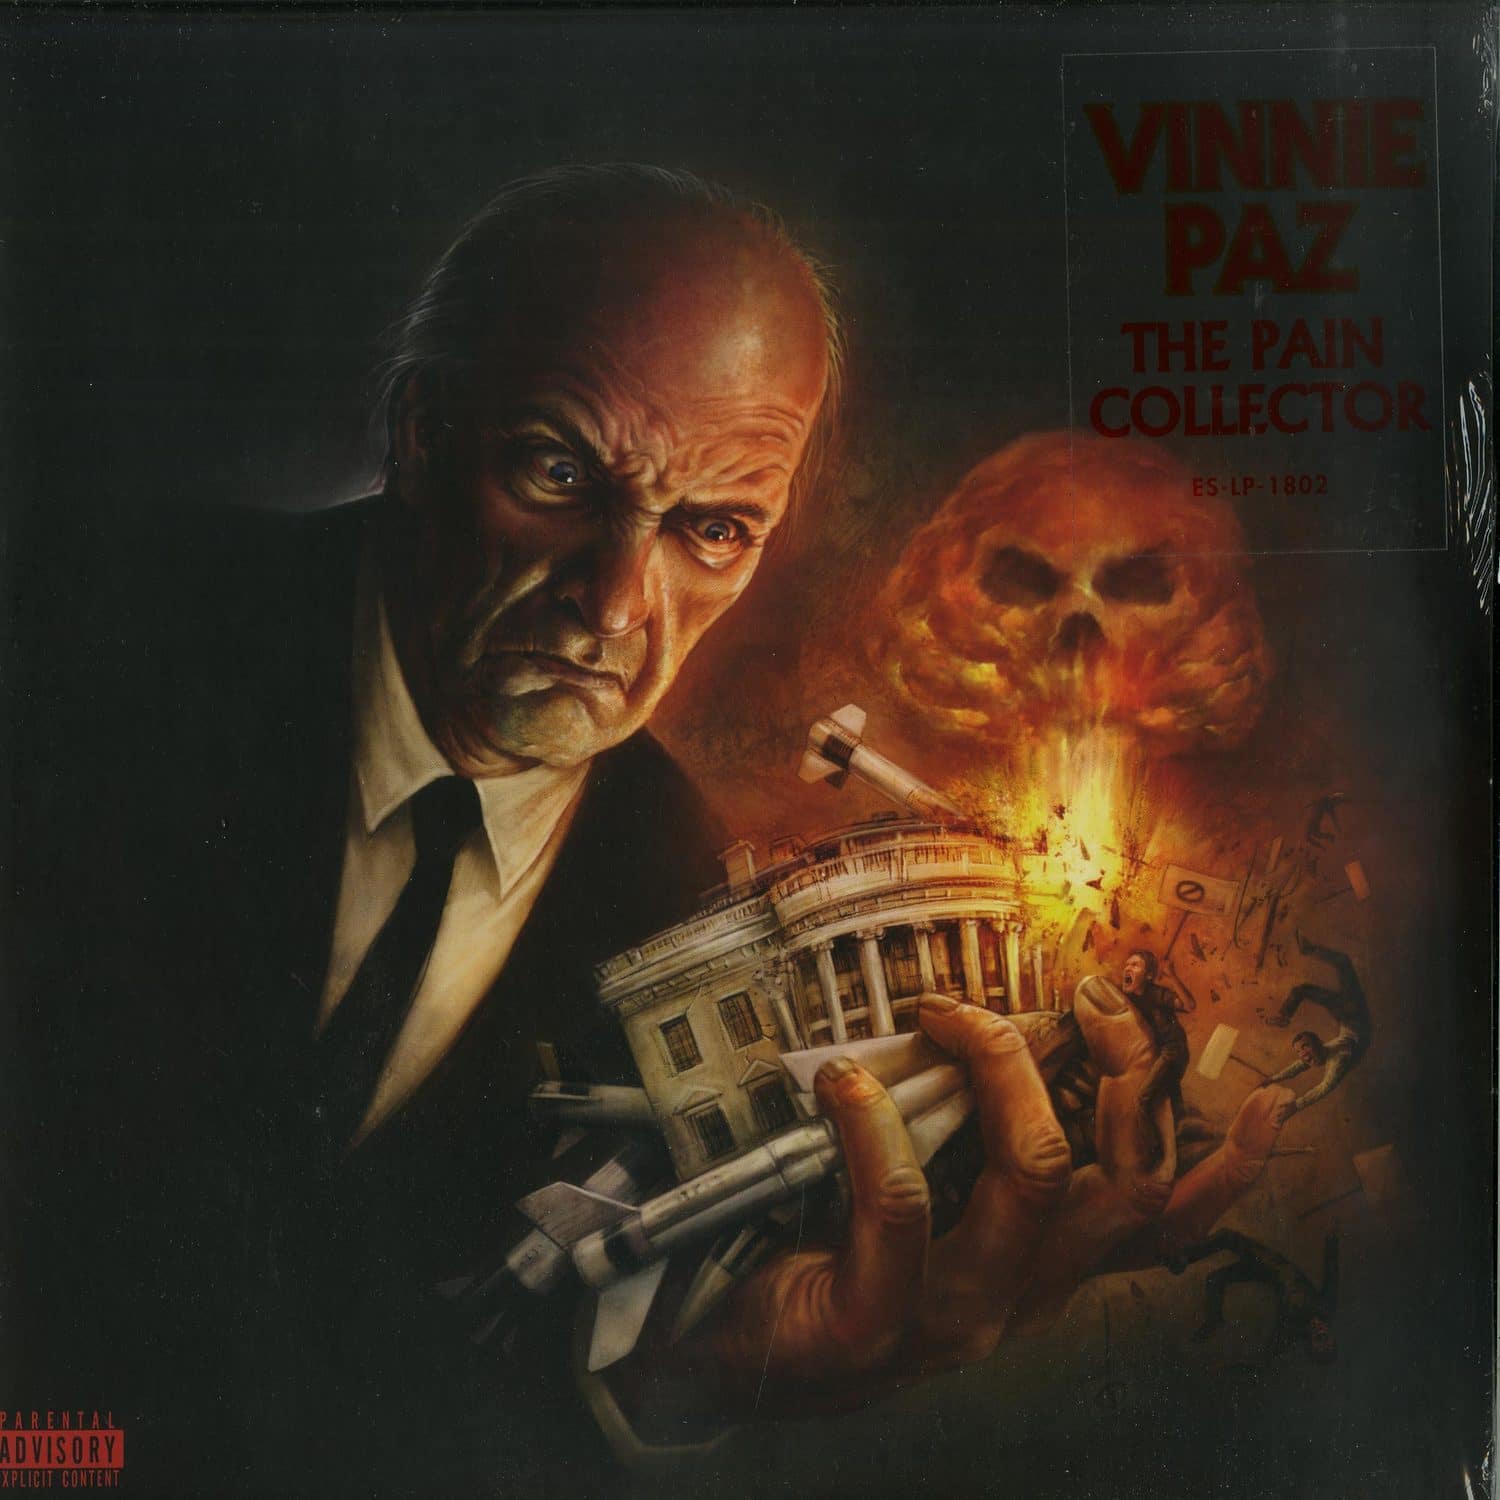 Vinnie Paz - THE PAIN COLLECTOR 